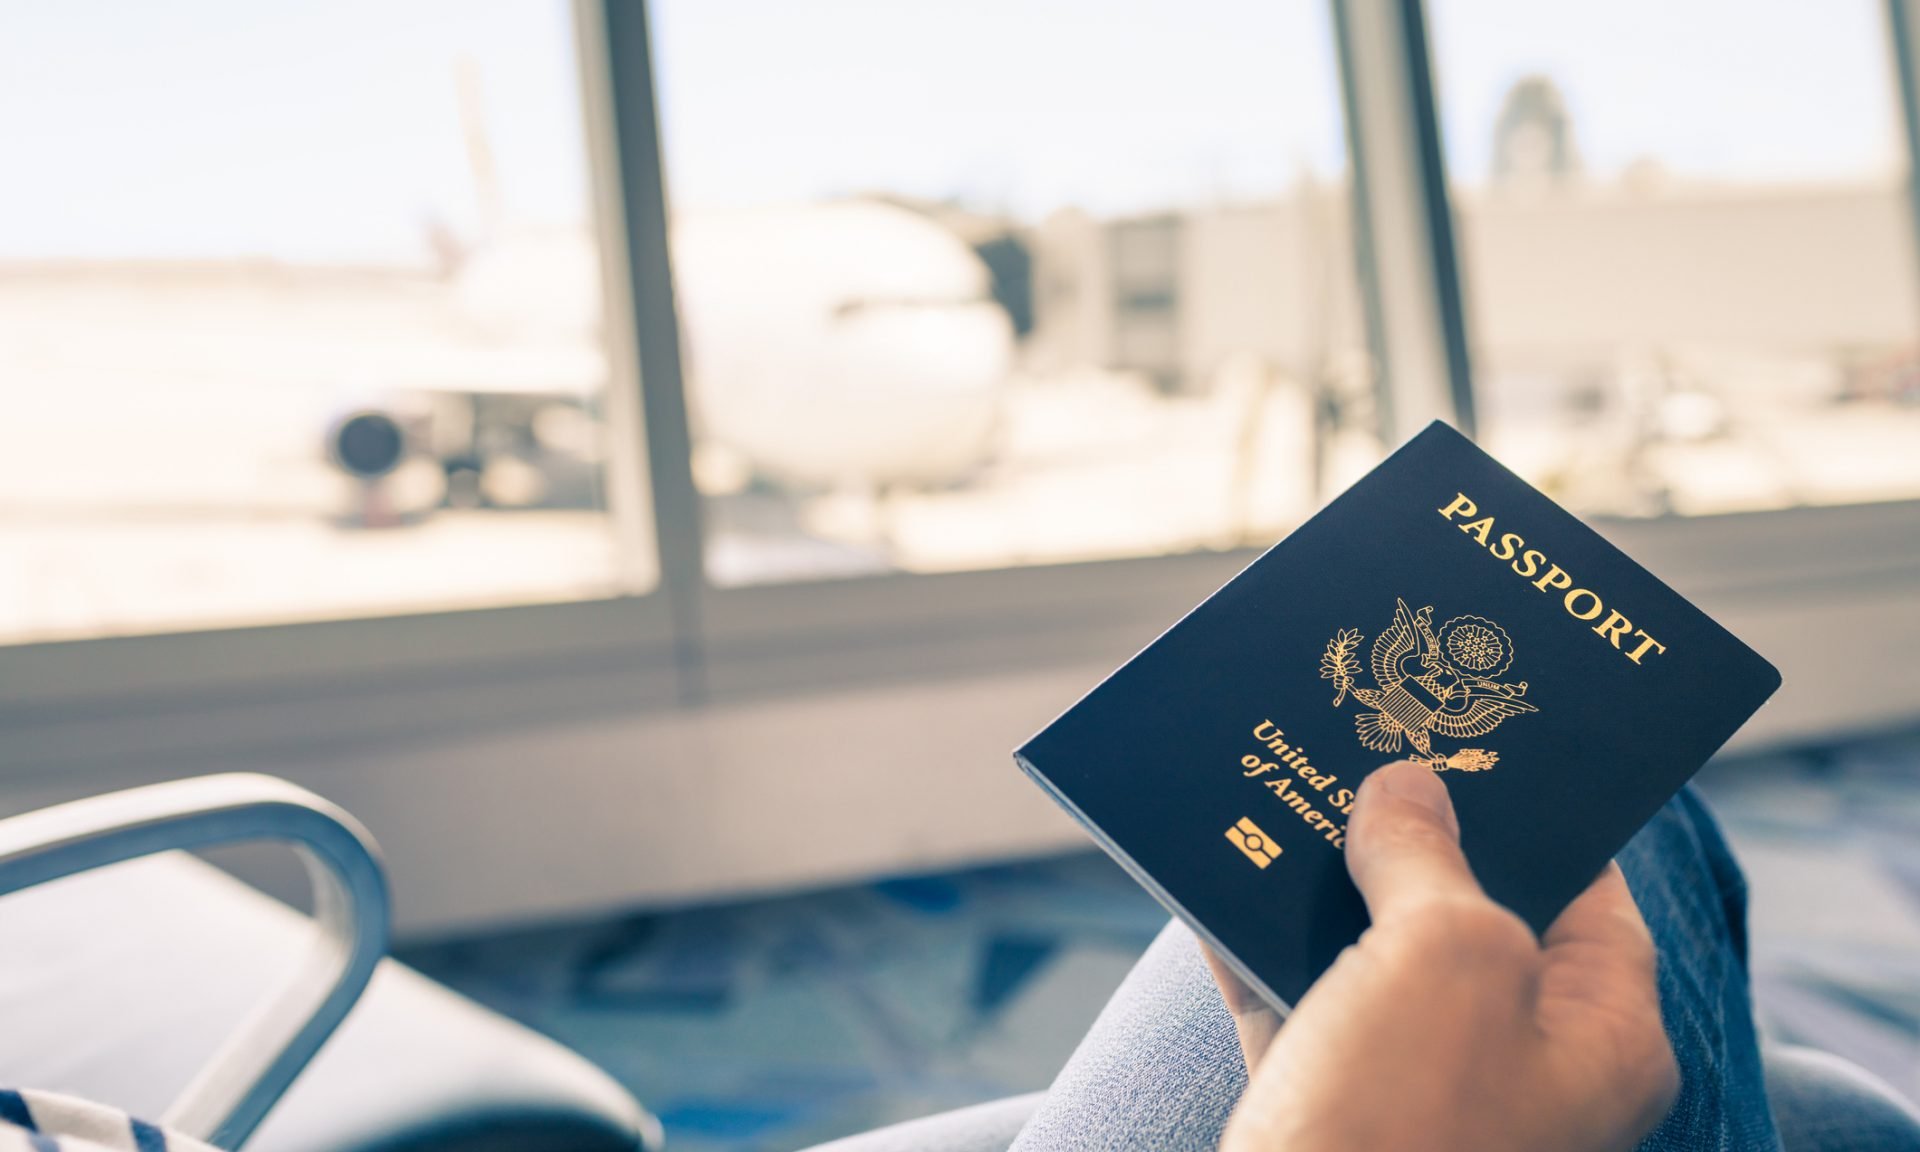 Skip The Line With Global Entry. Global Entry is a U.S. Customs